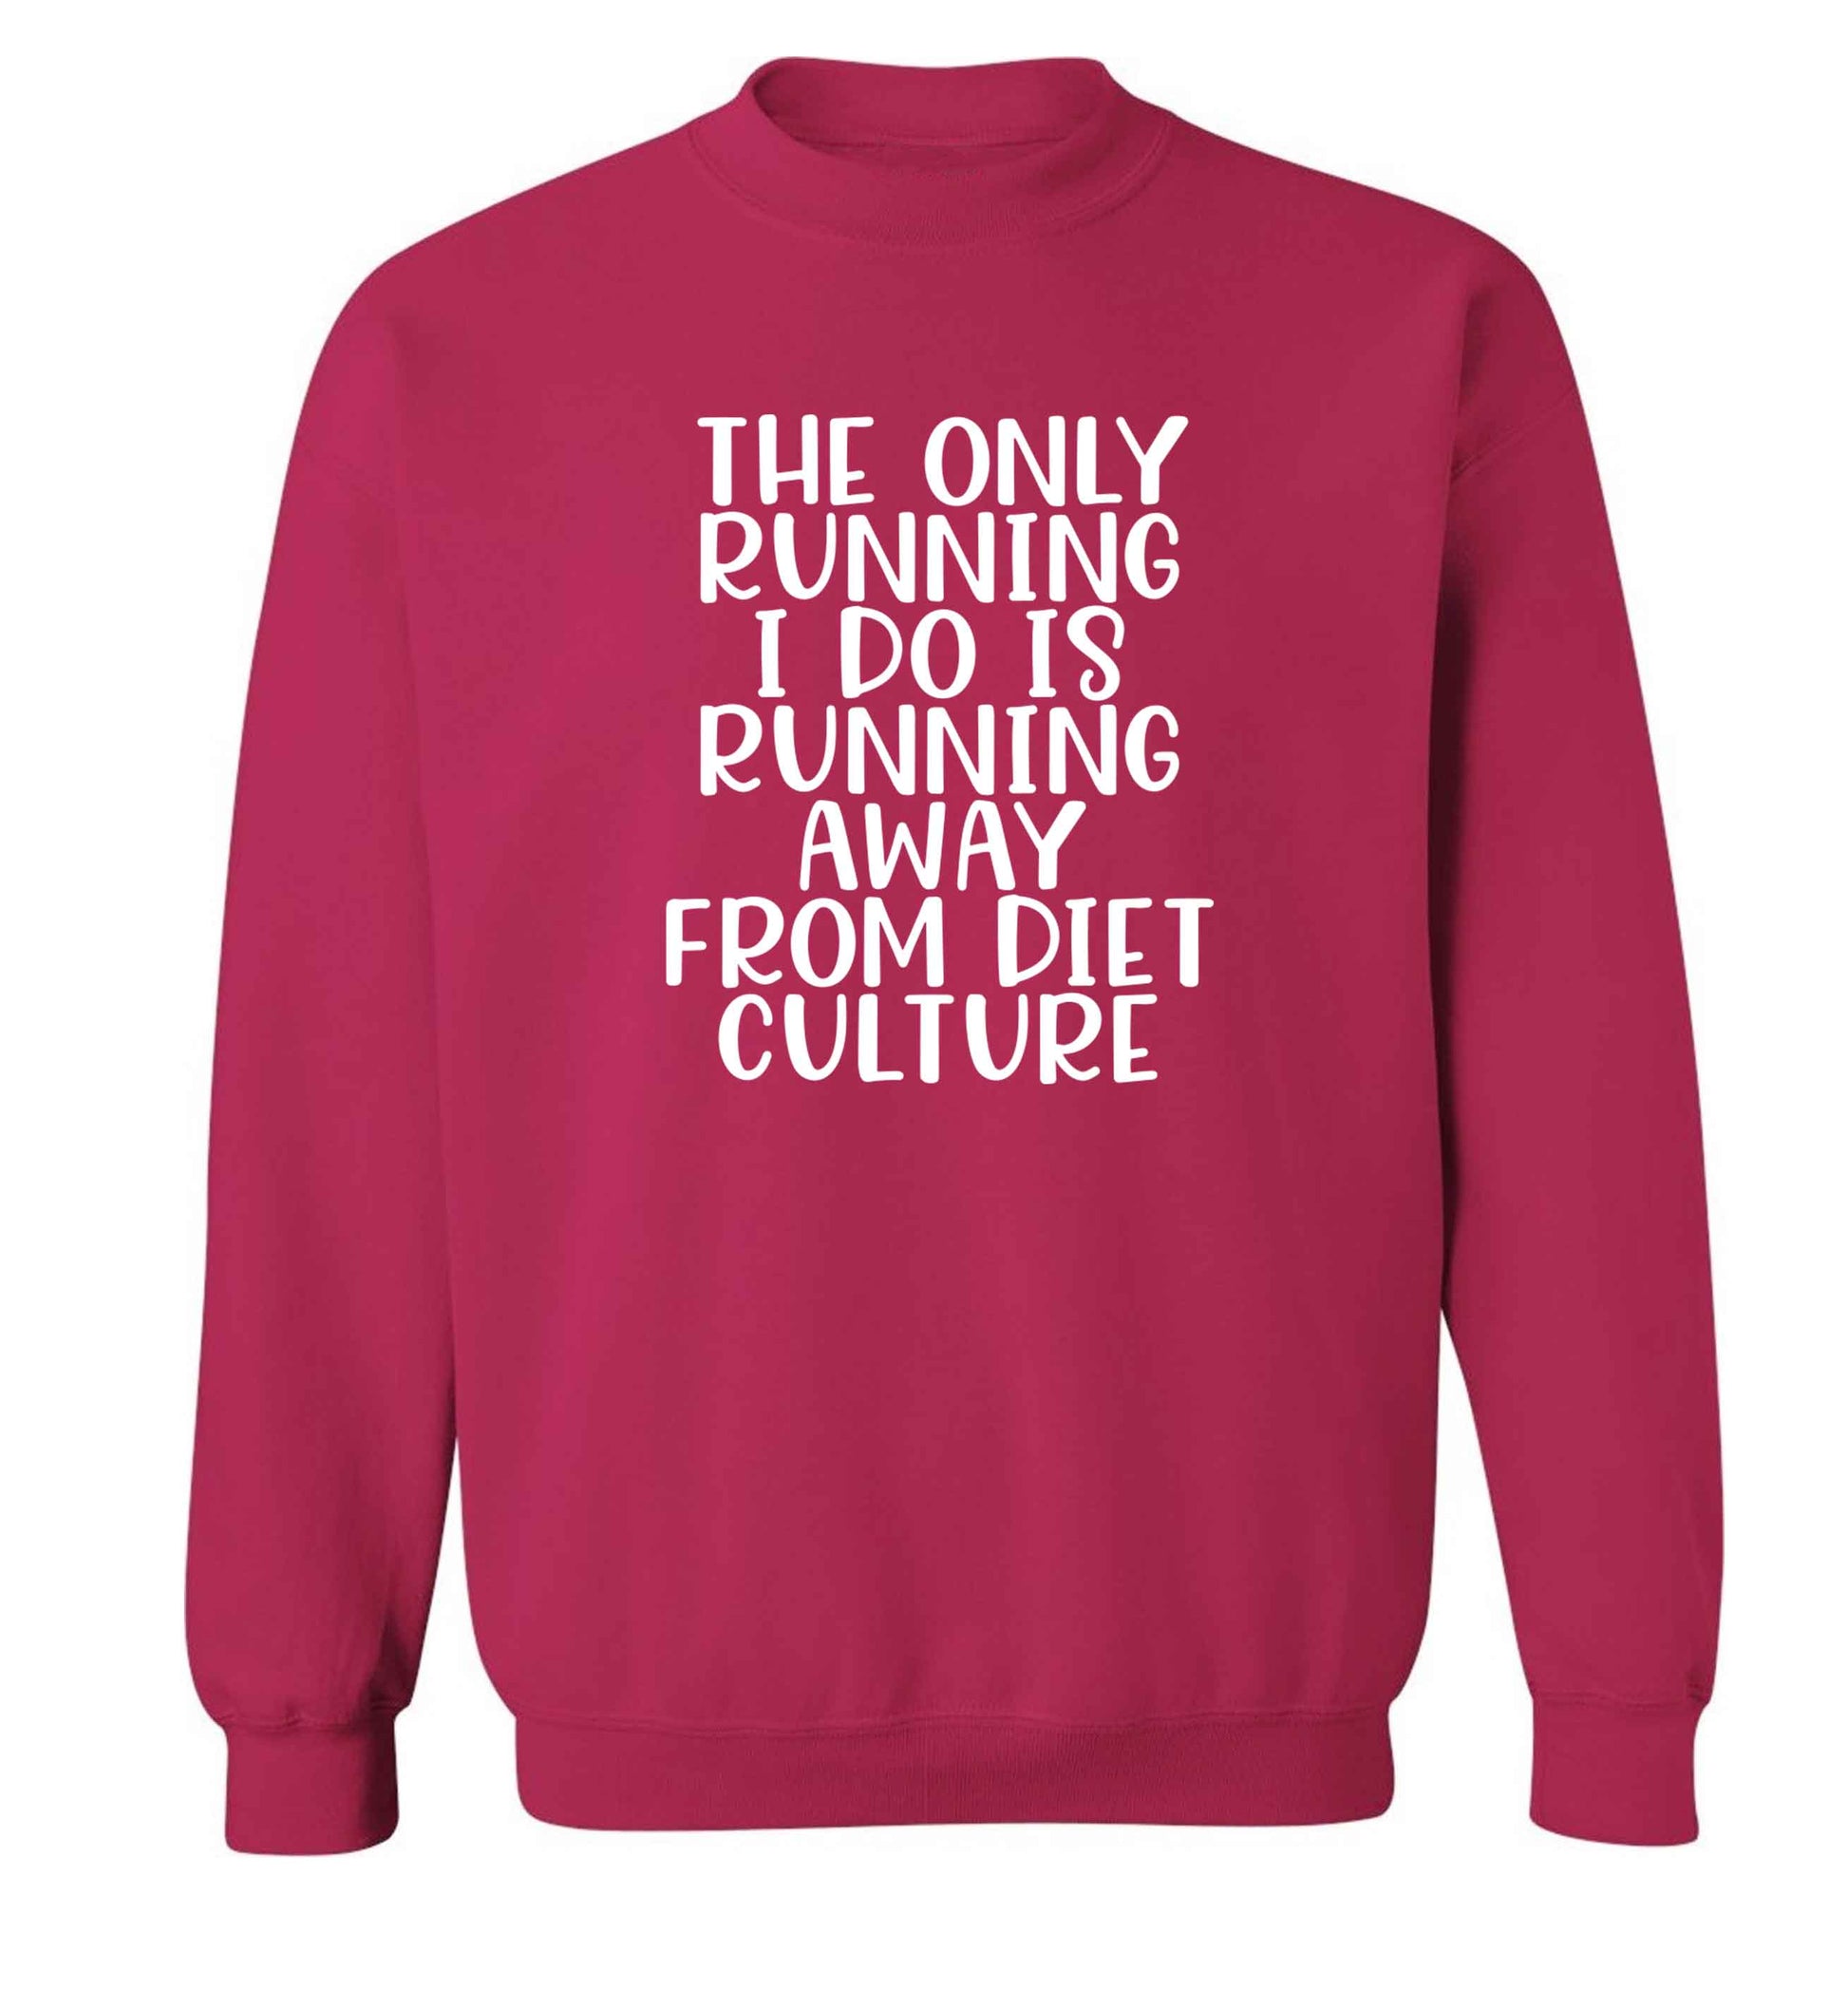 The only running I do is running away from diet culture adult's unisex pink sweater 2XL